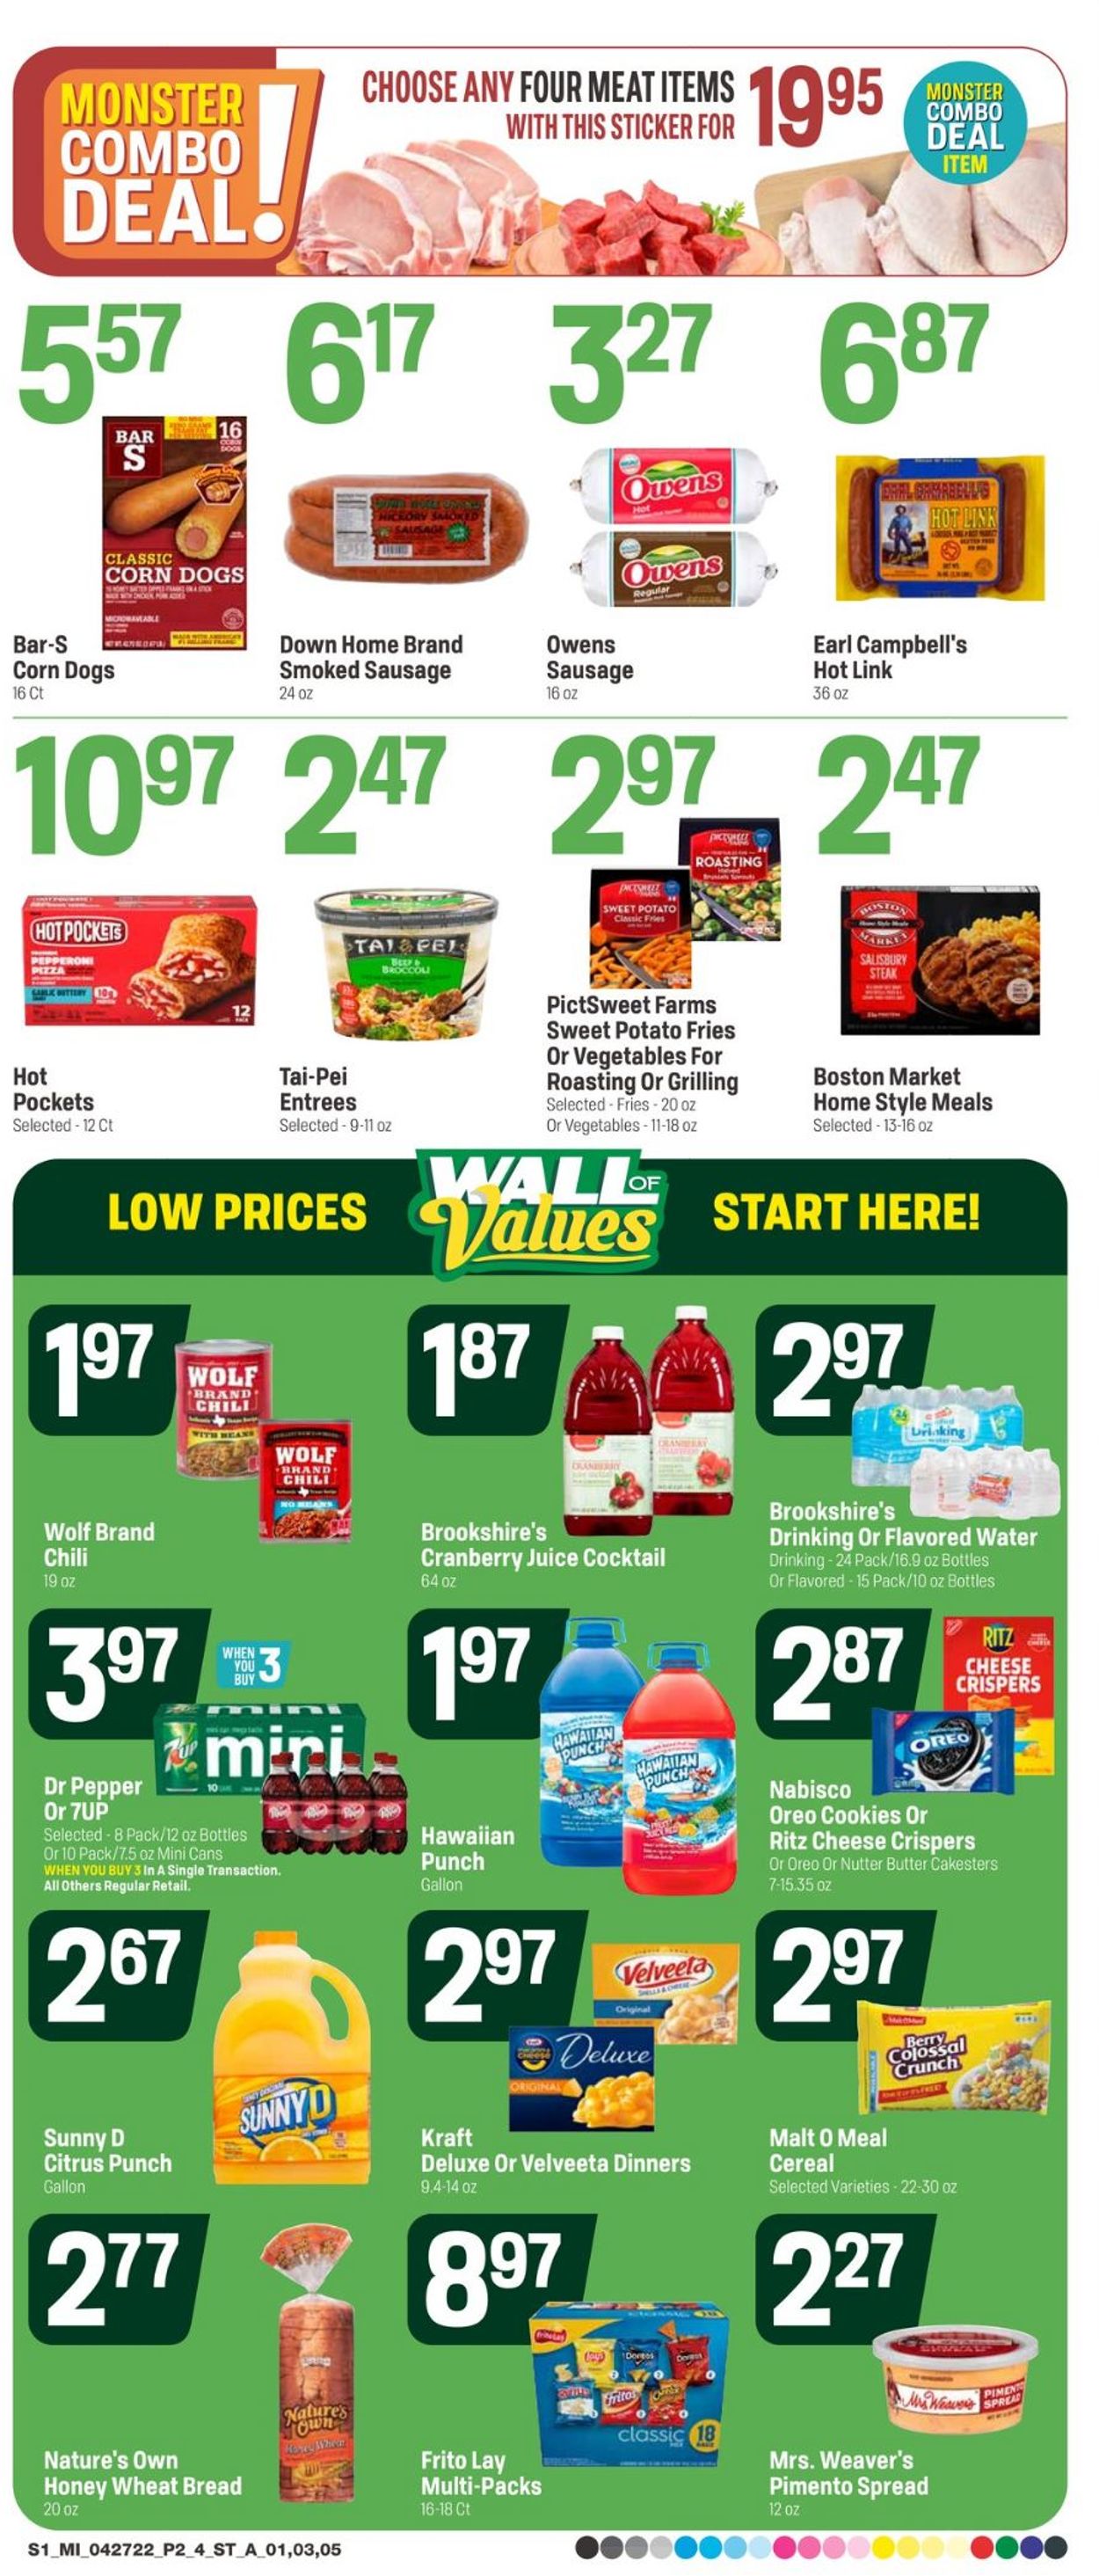 Super 1 Foods Ad from 04/27/2022